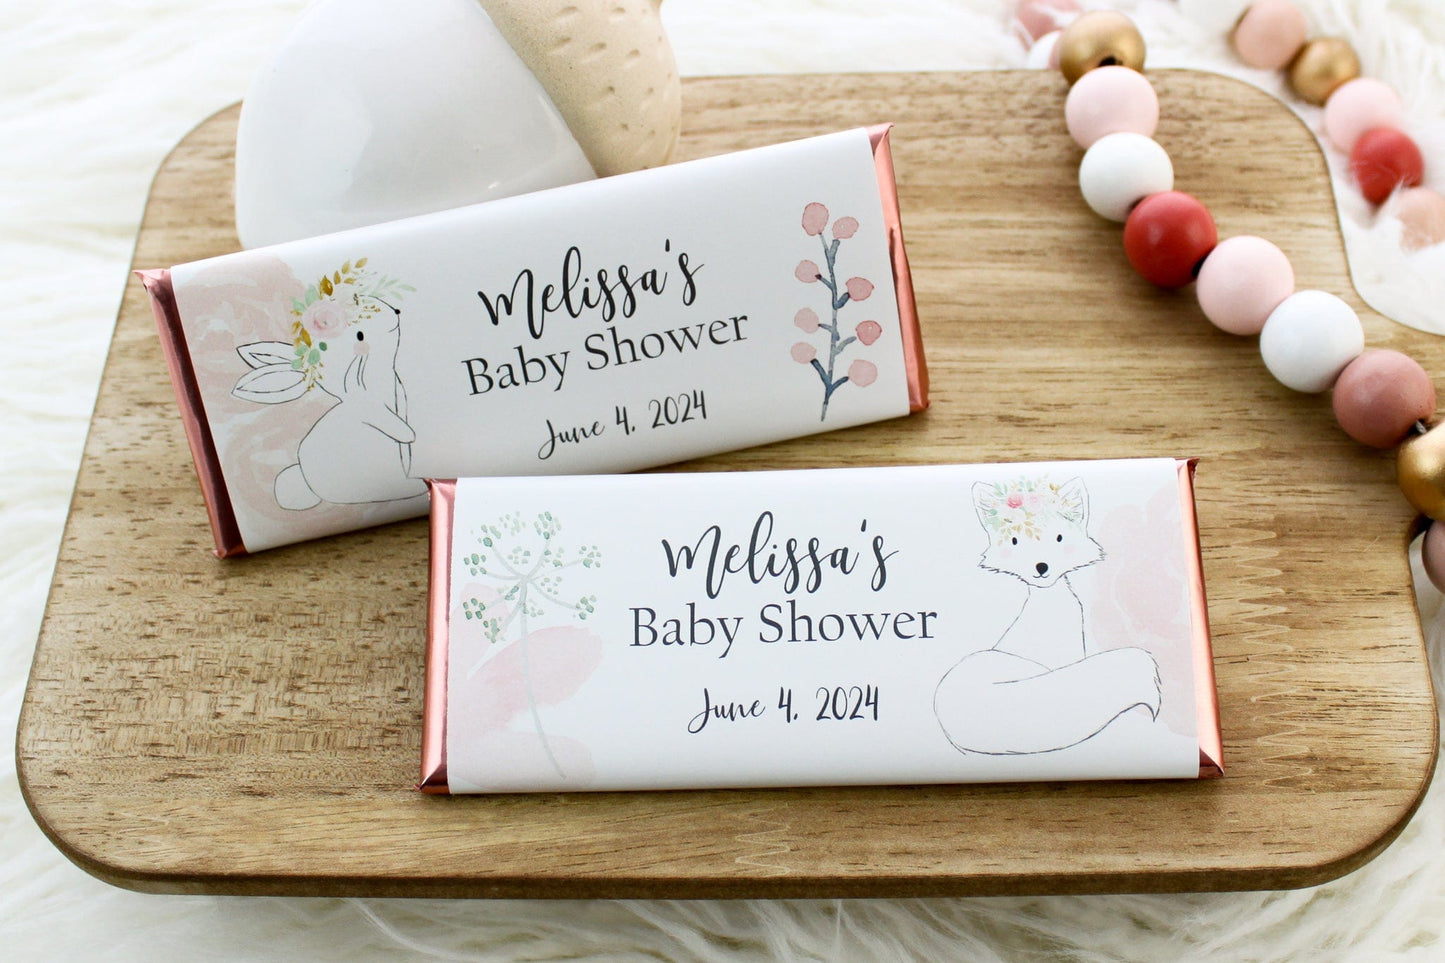 BS353 - Cute Woodland Bunny with Flowers Baby Shower Candy Bar Wrappers Cute Woodland Bunny with Flowers Baby Shower Candy Bar Wrappers Birth Announcement bs353